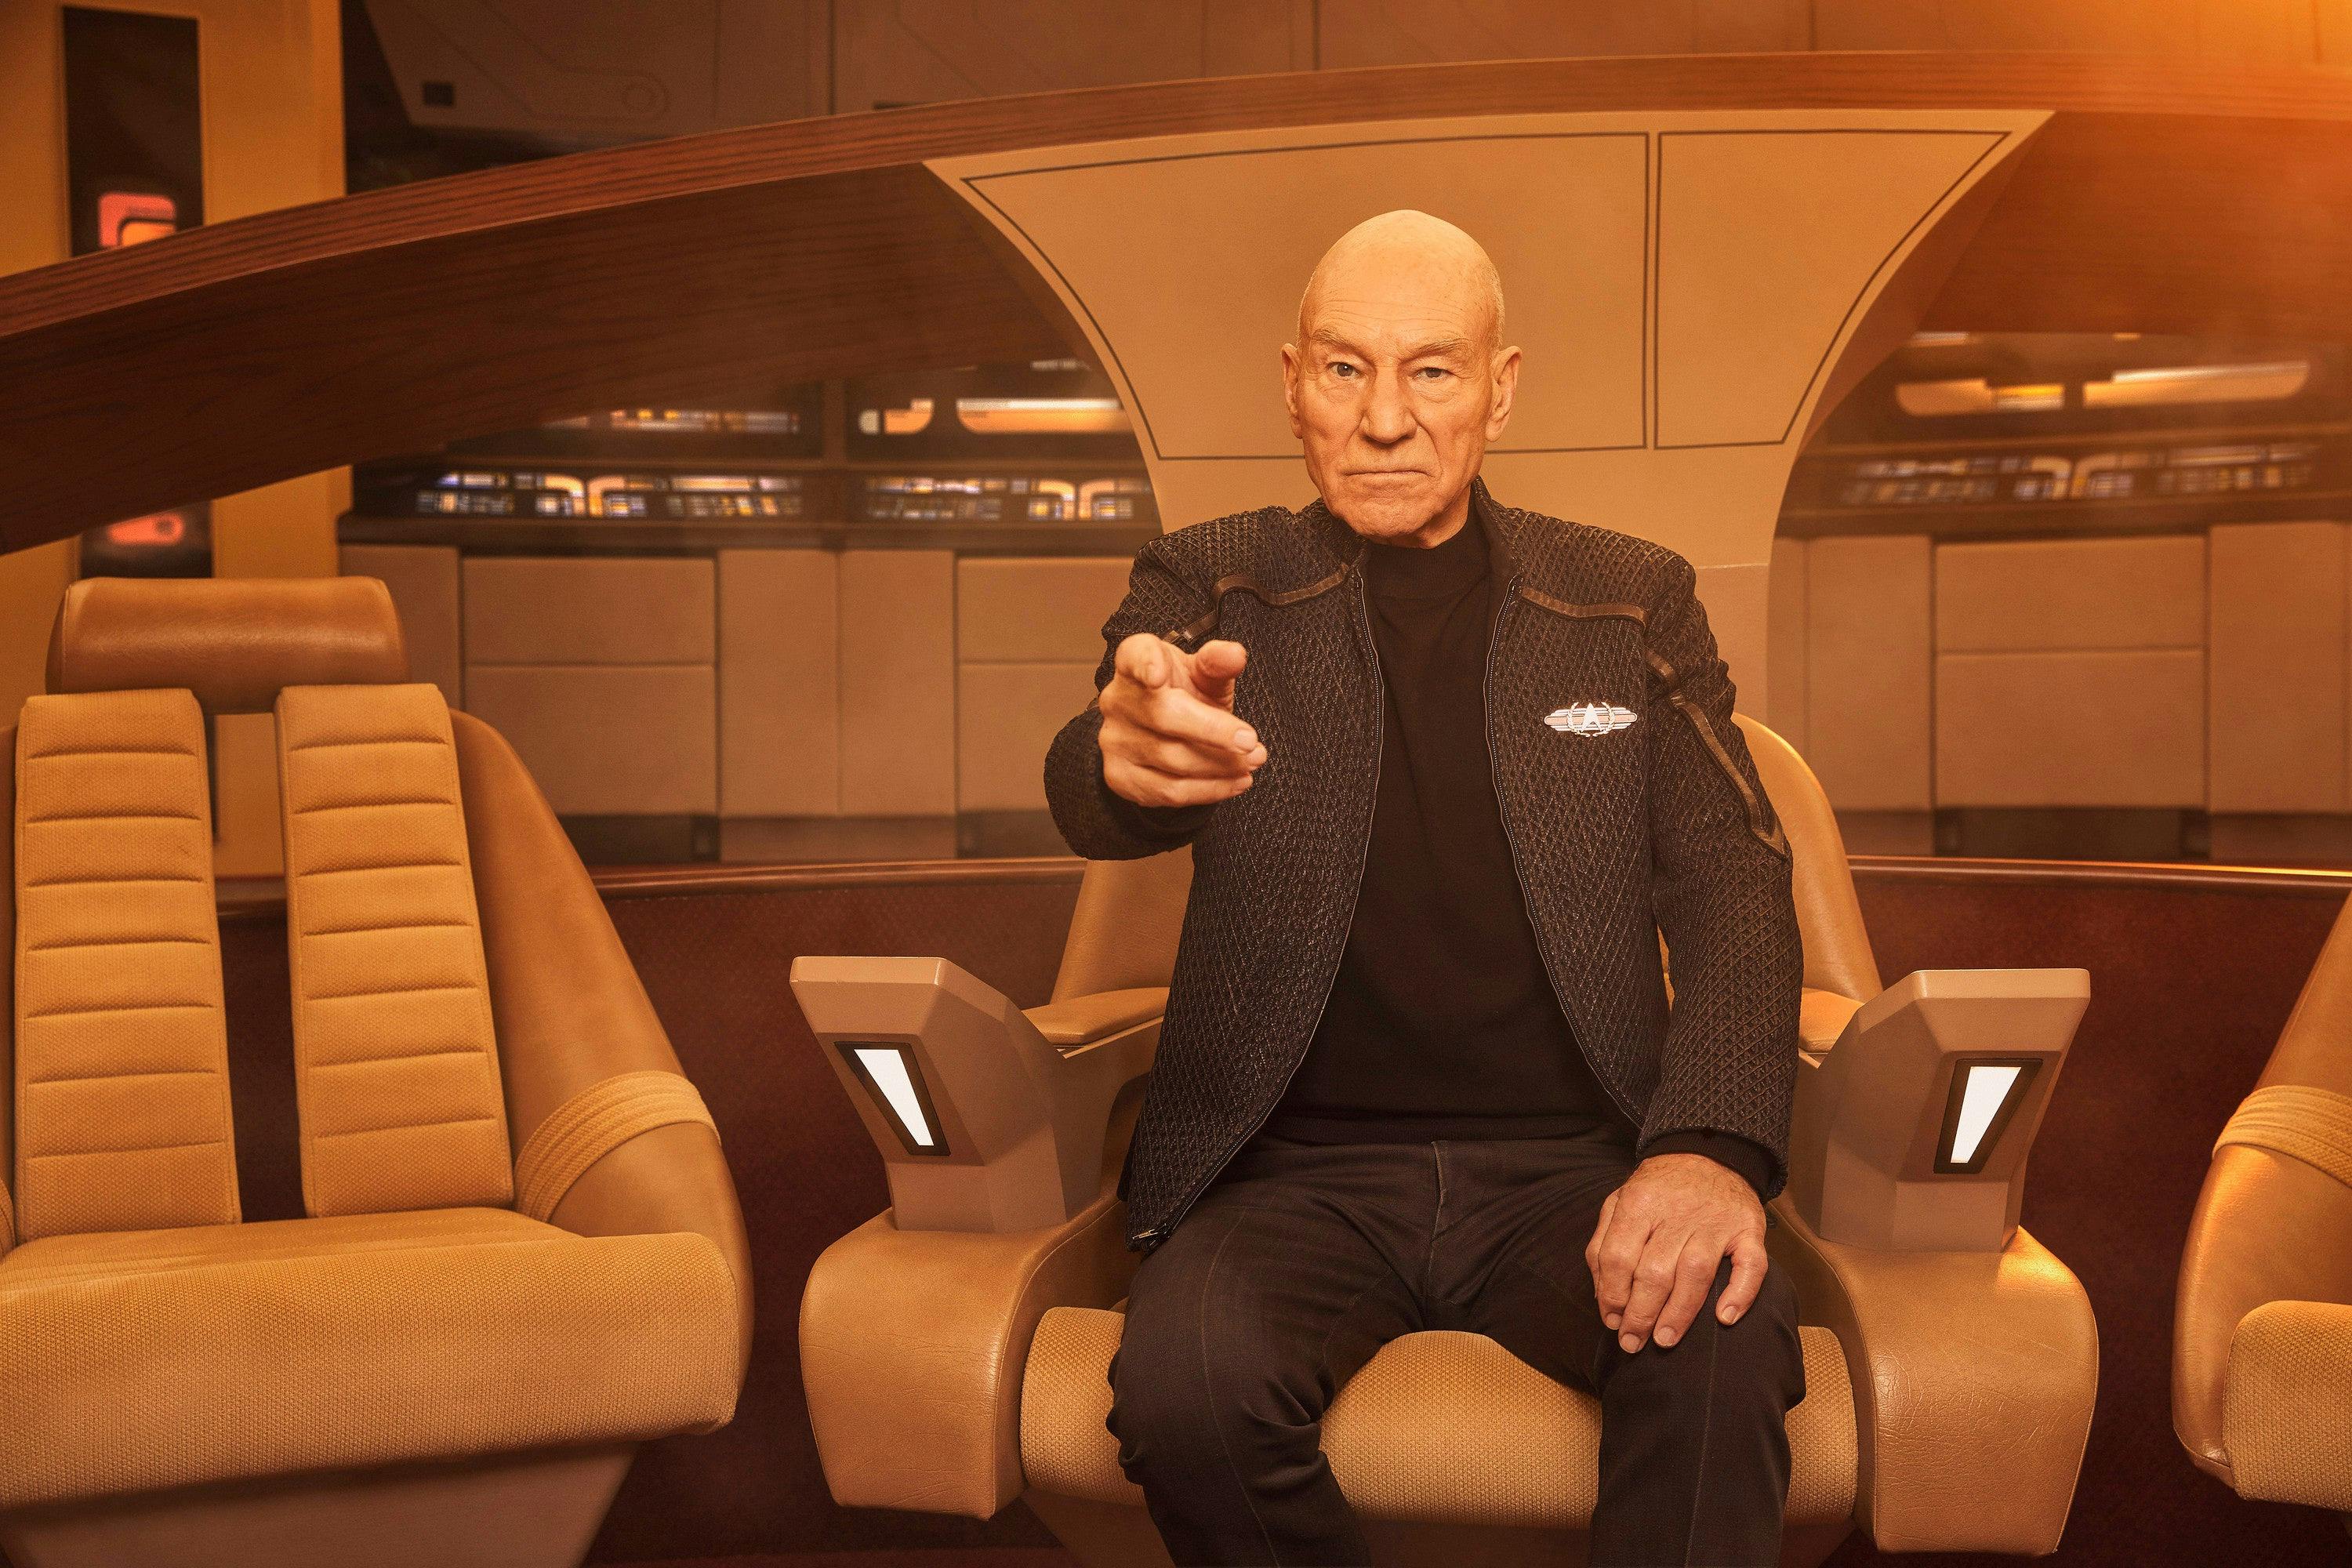 Jean-Luc Picard sitting in command on the Enterprise-D with his finger pointed forward signaling the helm to engage